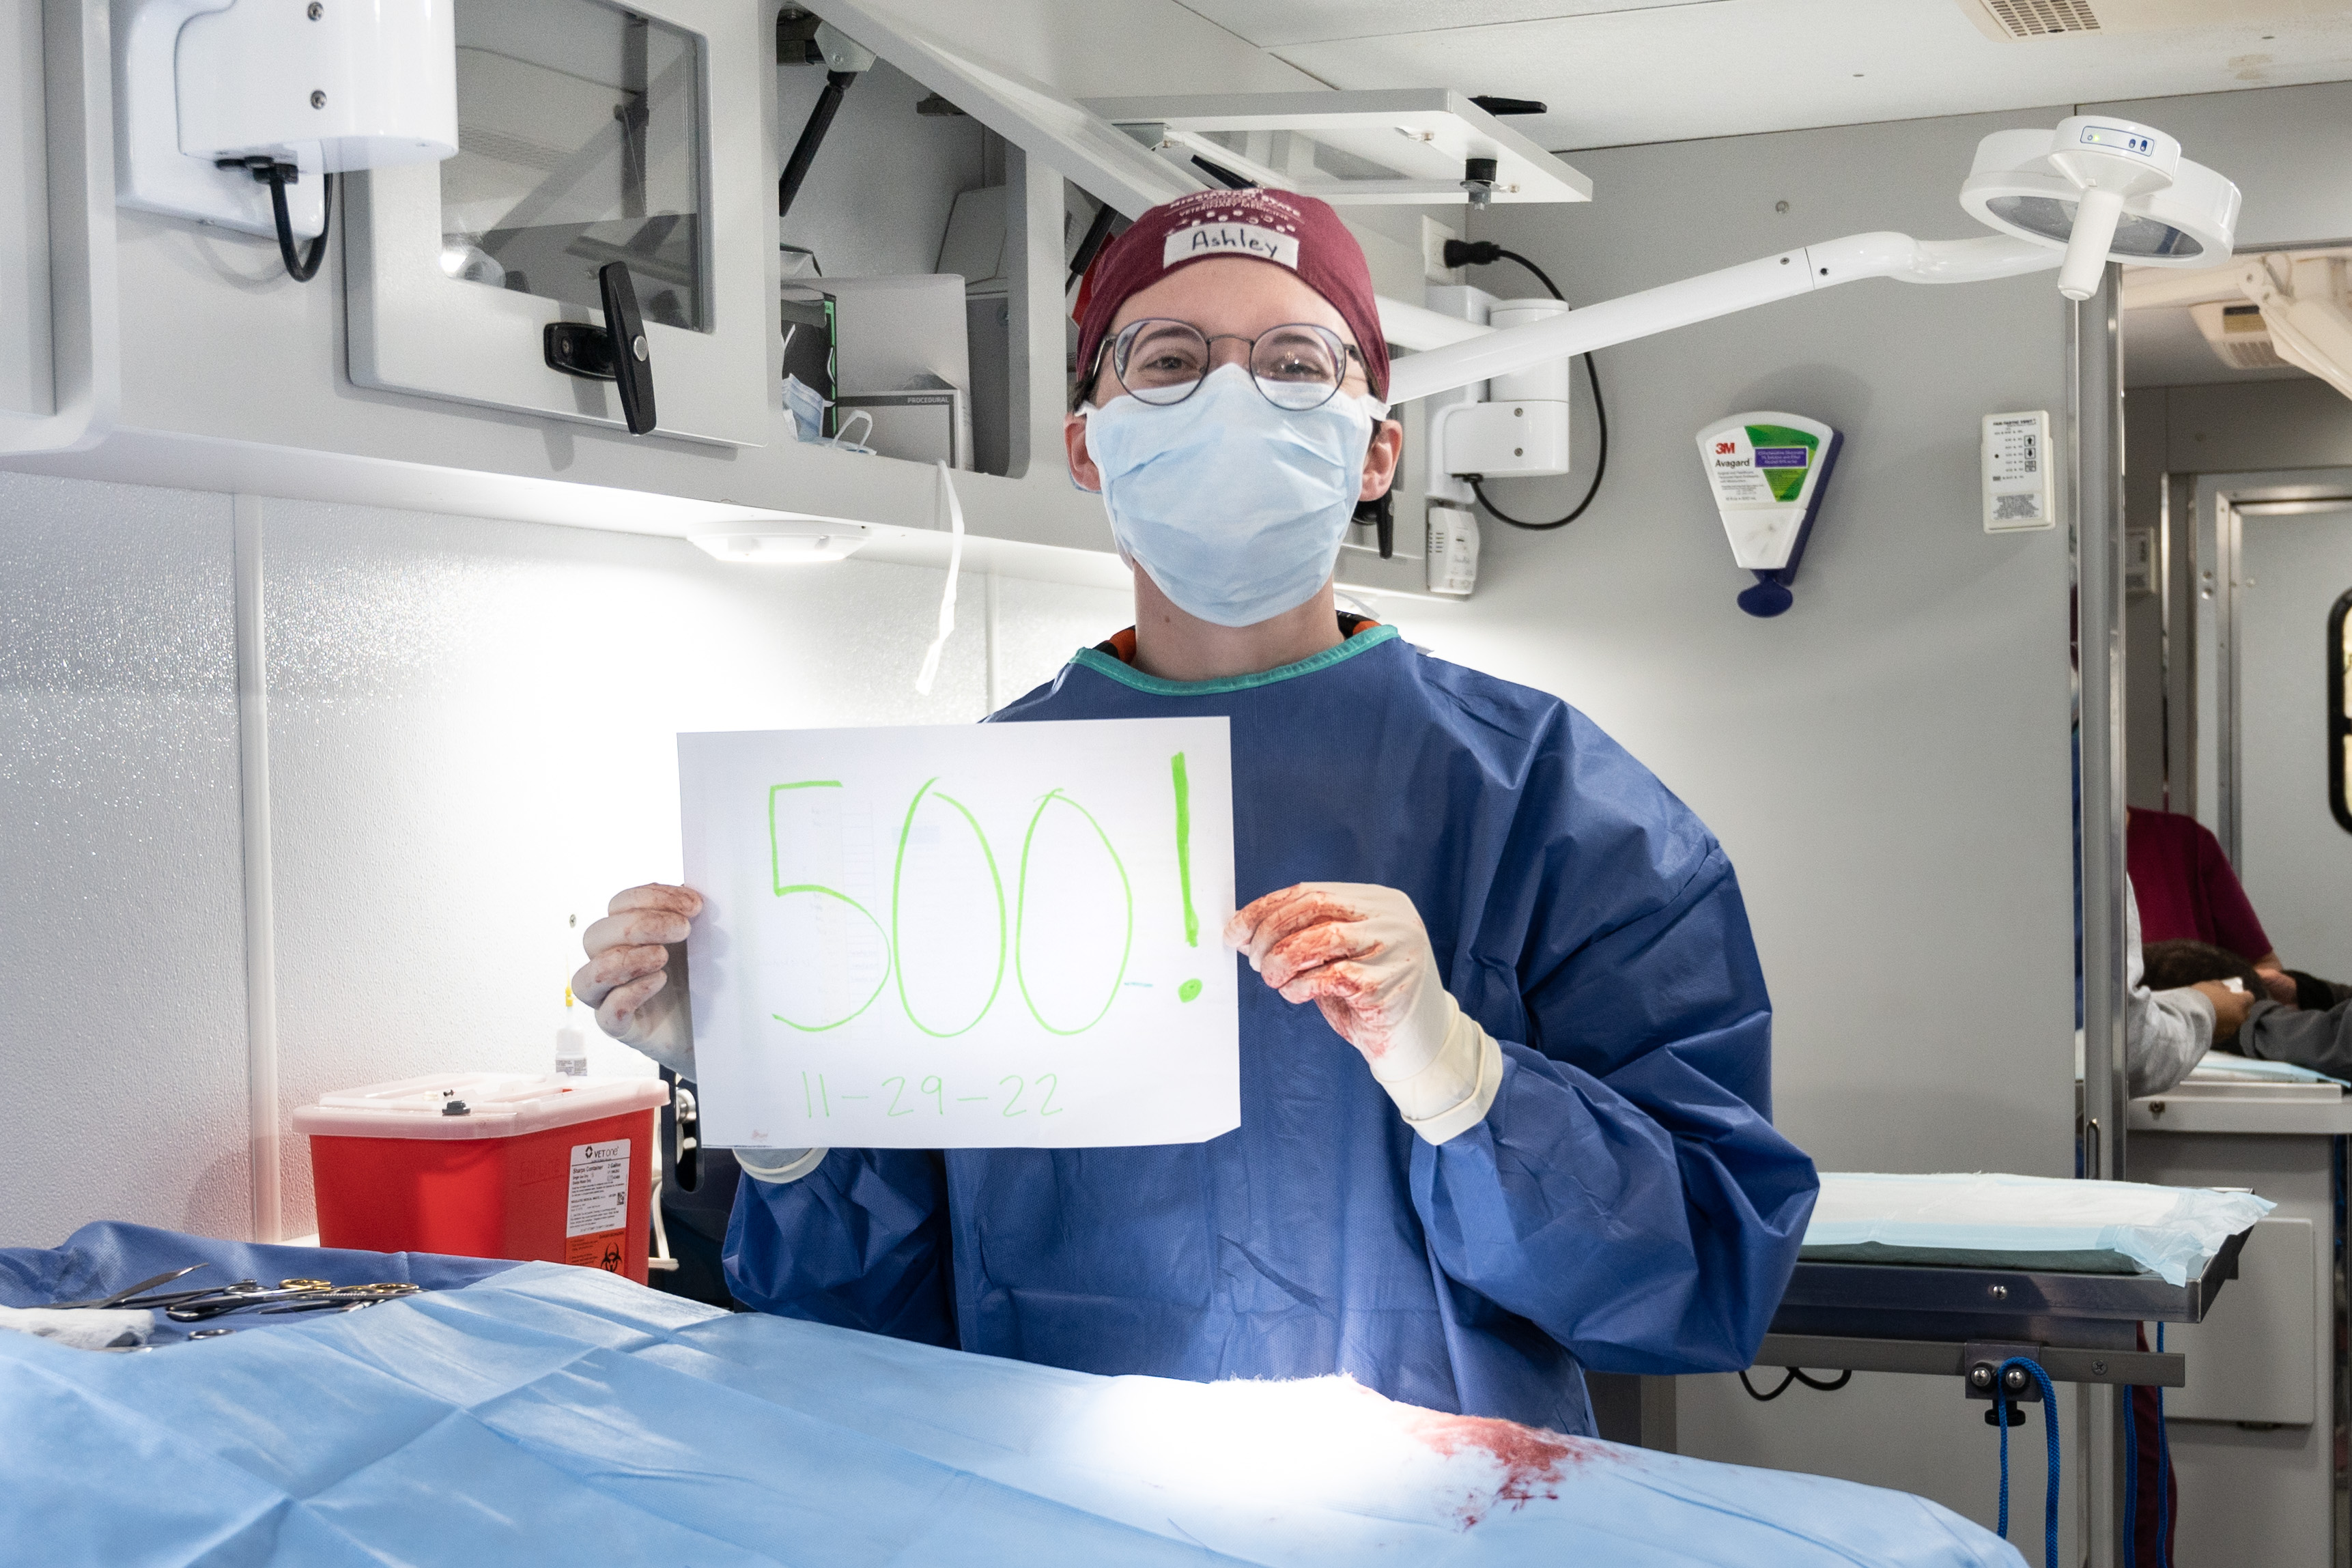 Student Ashley Smith holds a sign commemorating her 500th surgery